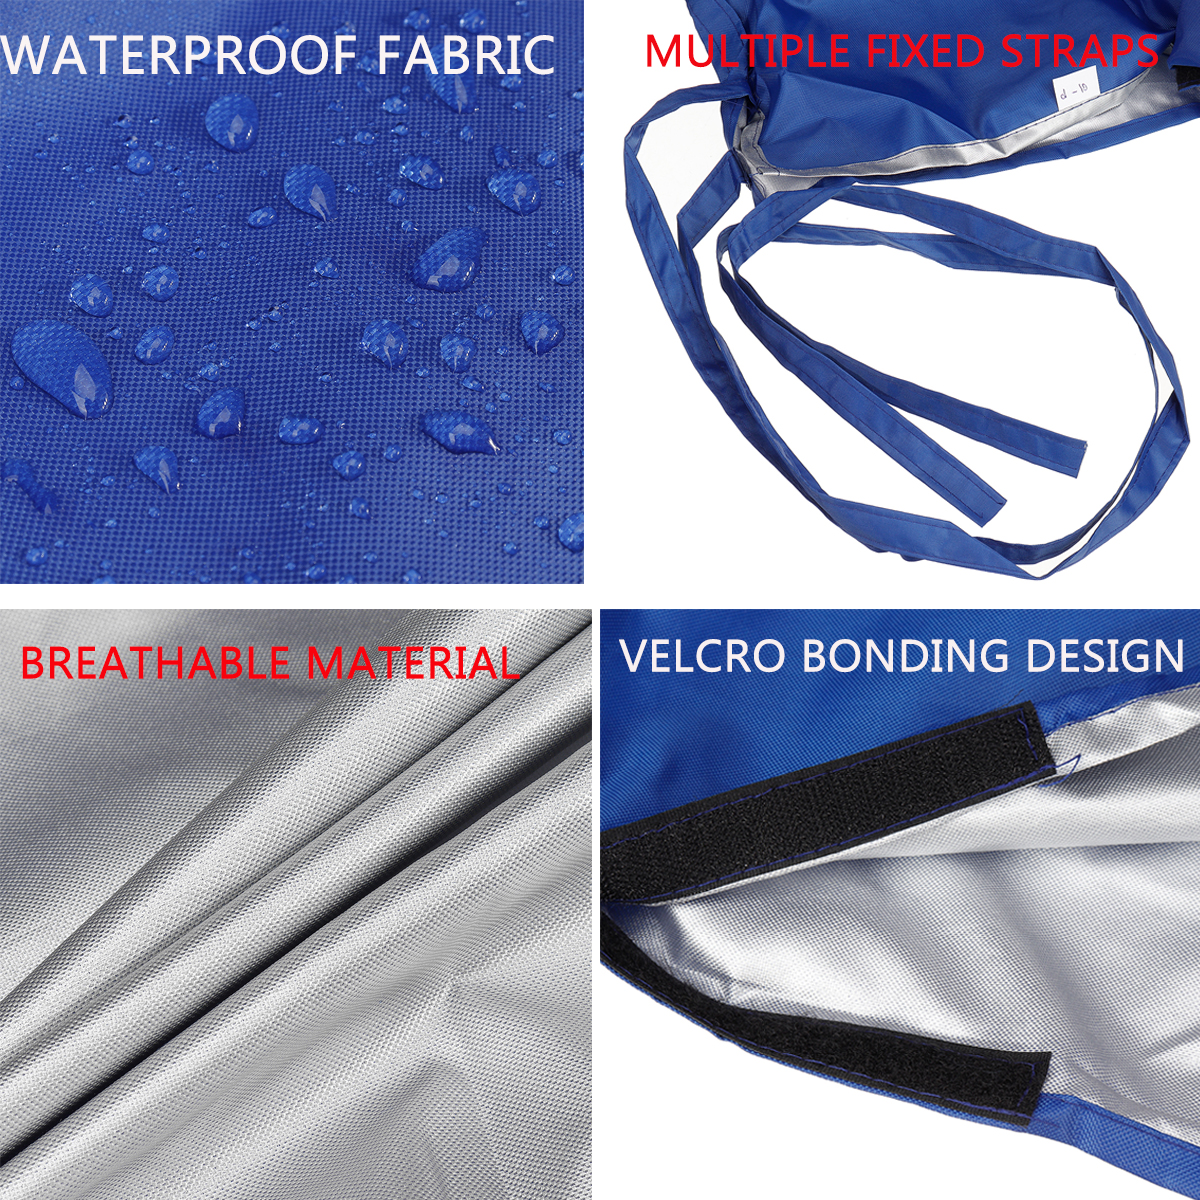 420D 9-10ft / 11-12ft / 12-13ft Mainsail Boom Cover Sail Protector Waterproof Fabric